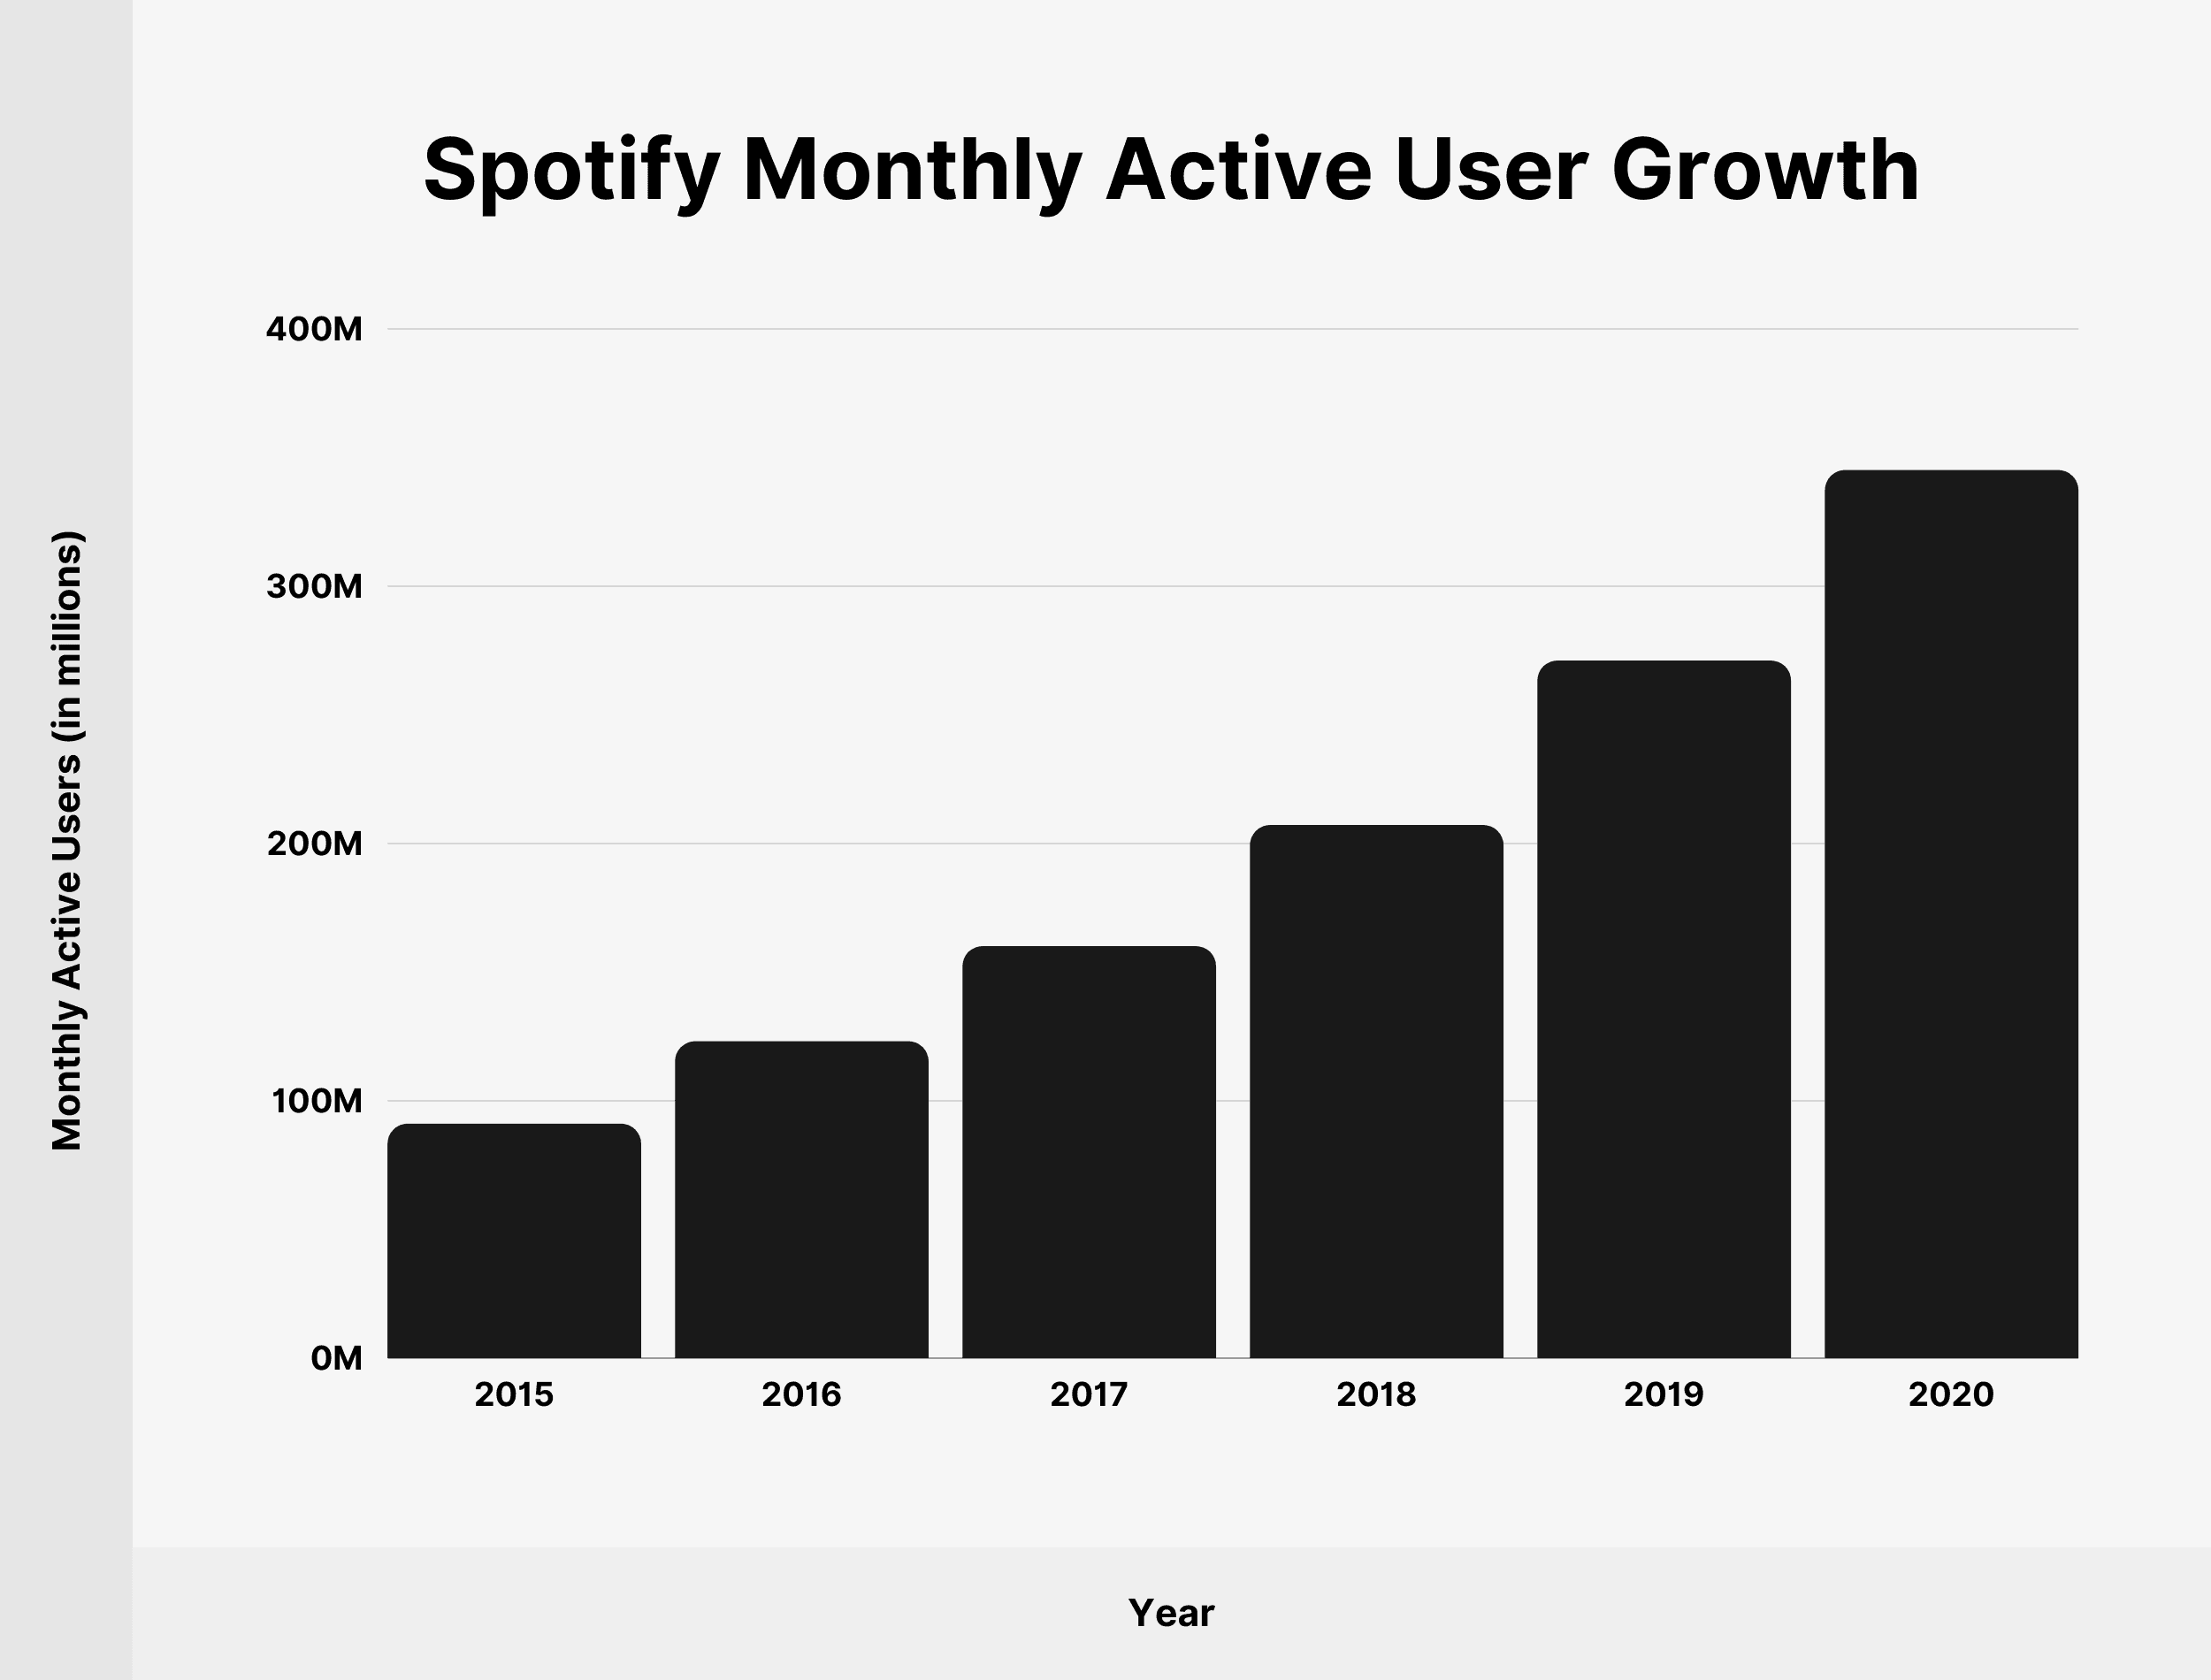 Spotify monthly active user growth